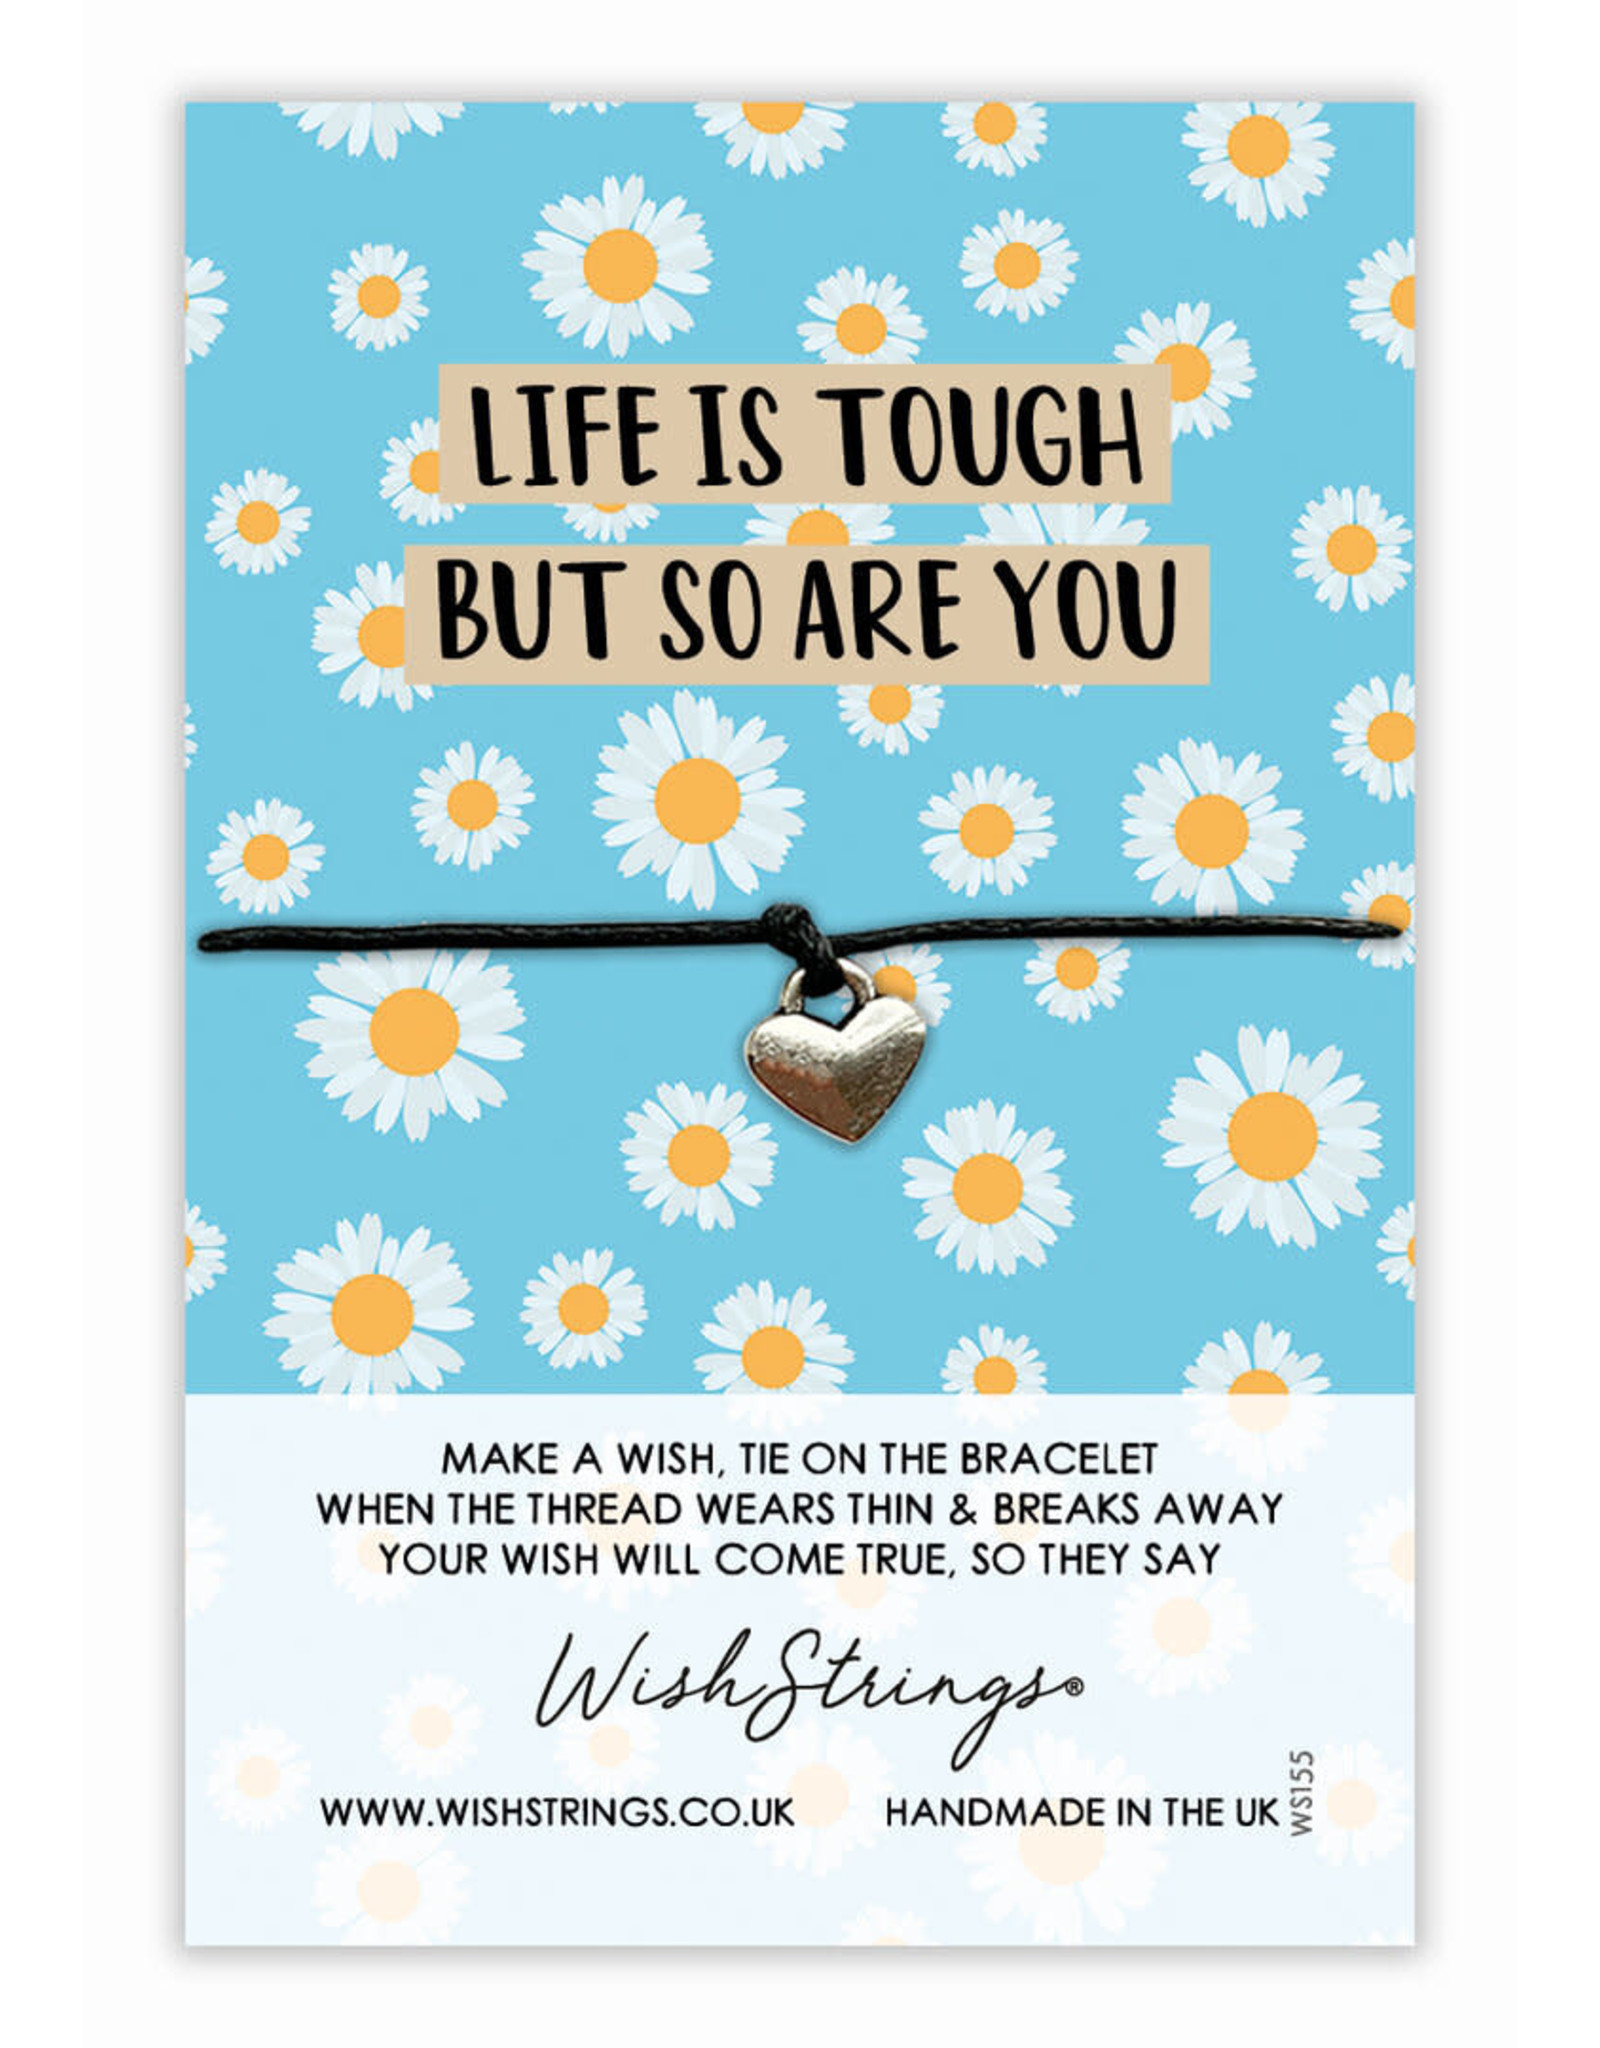 WishString “Life is tough but so are you”